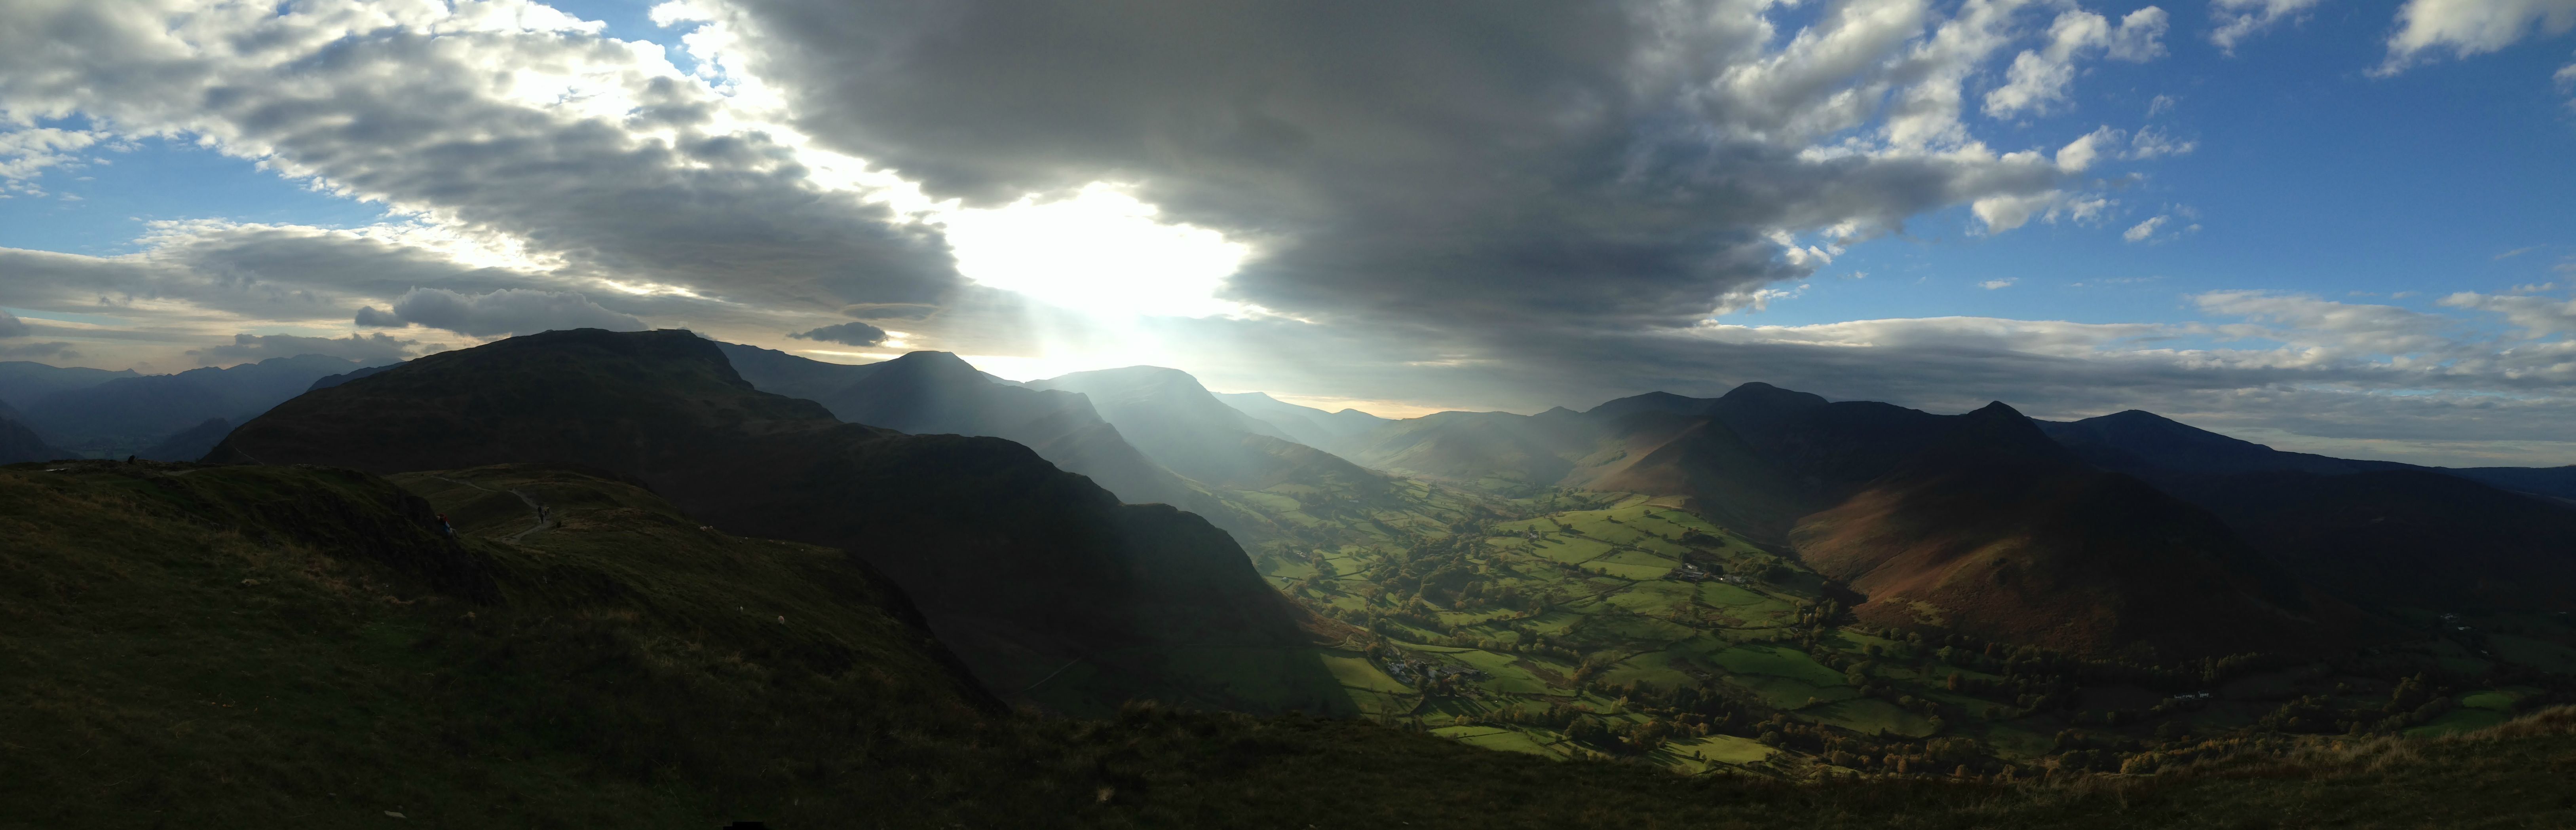 Catbells 4K wallpaper for your desktop or mobile screen free and easy to download